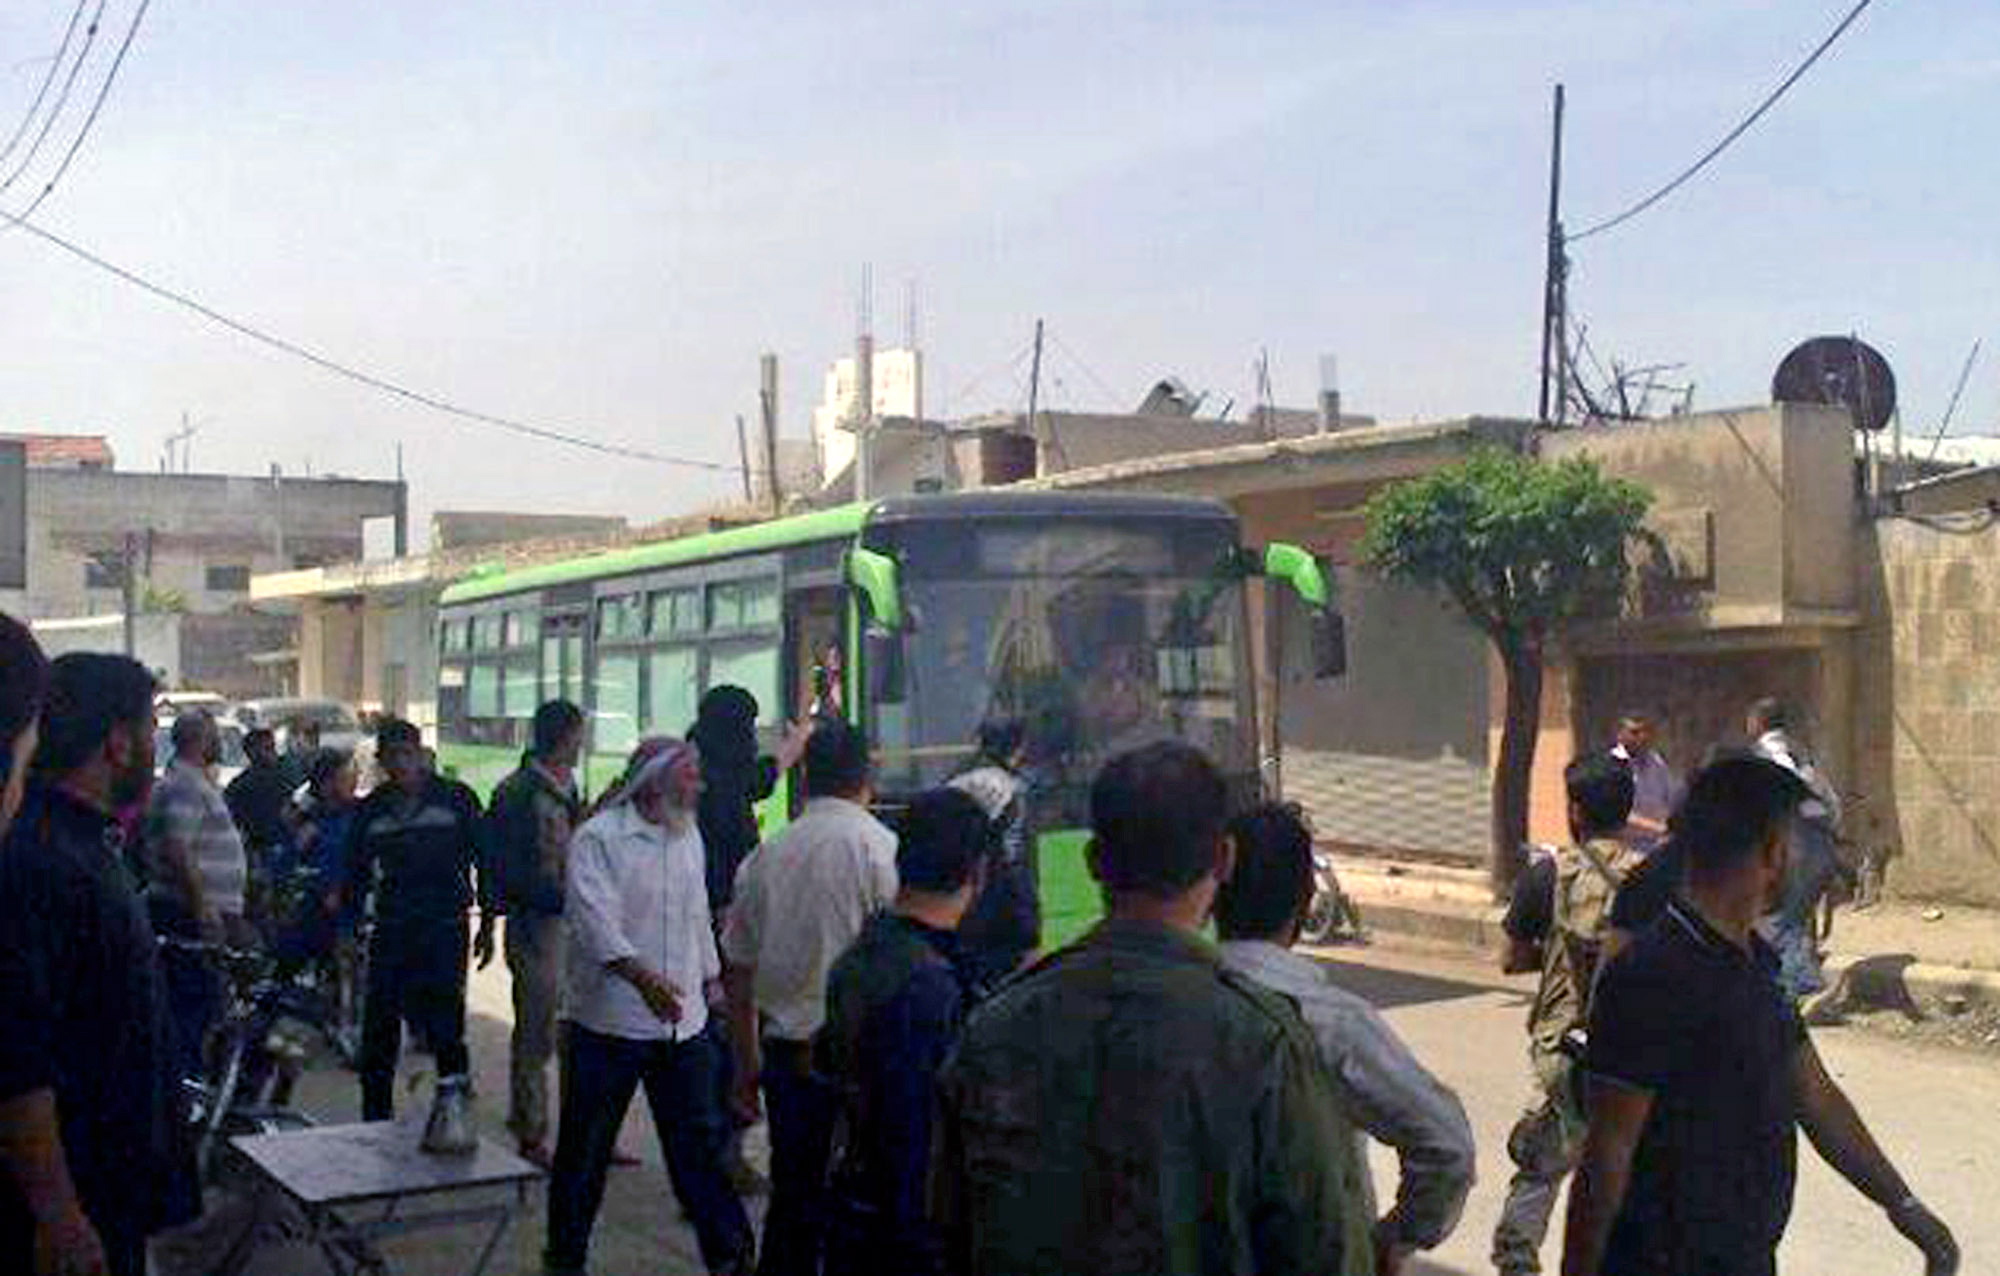 Free Syrian Army fighters board a bus leaving Homs, Syria, earlier this month.